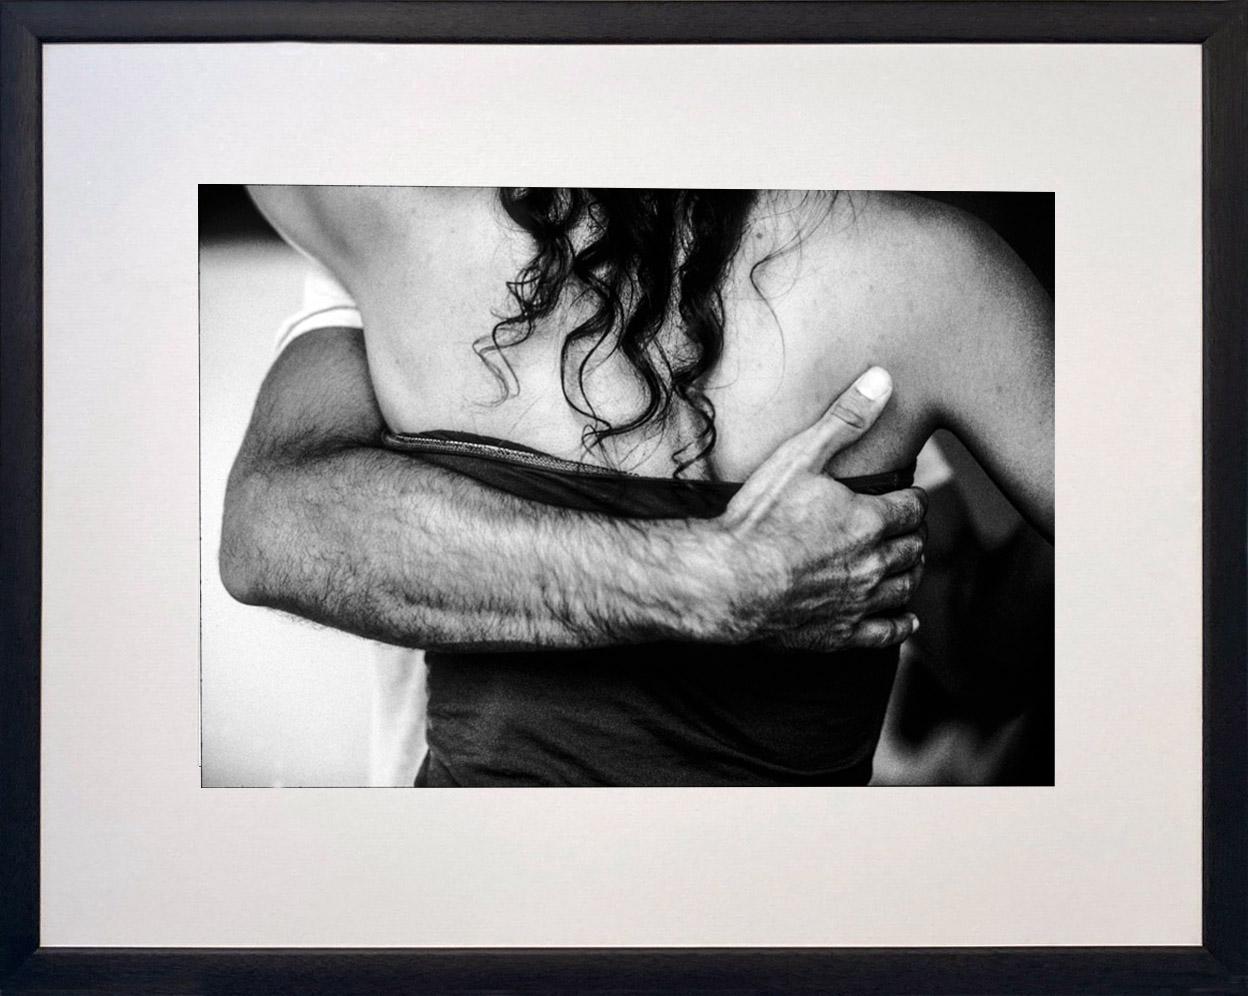 La Linea by James Sparshatt.  Romantic black and white framed photograph of tango dancers.

A line to be crossed… a man leads with strength and tenderness on the tango floor in Buenos Aires.

James Sparshatt’s photographs of music and dance capture